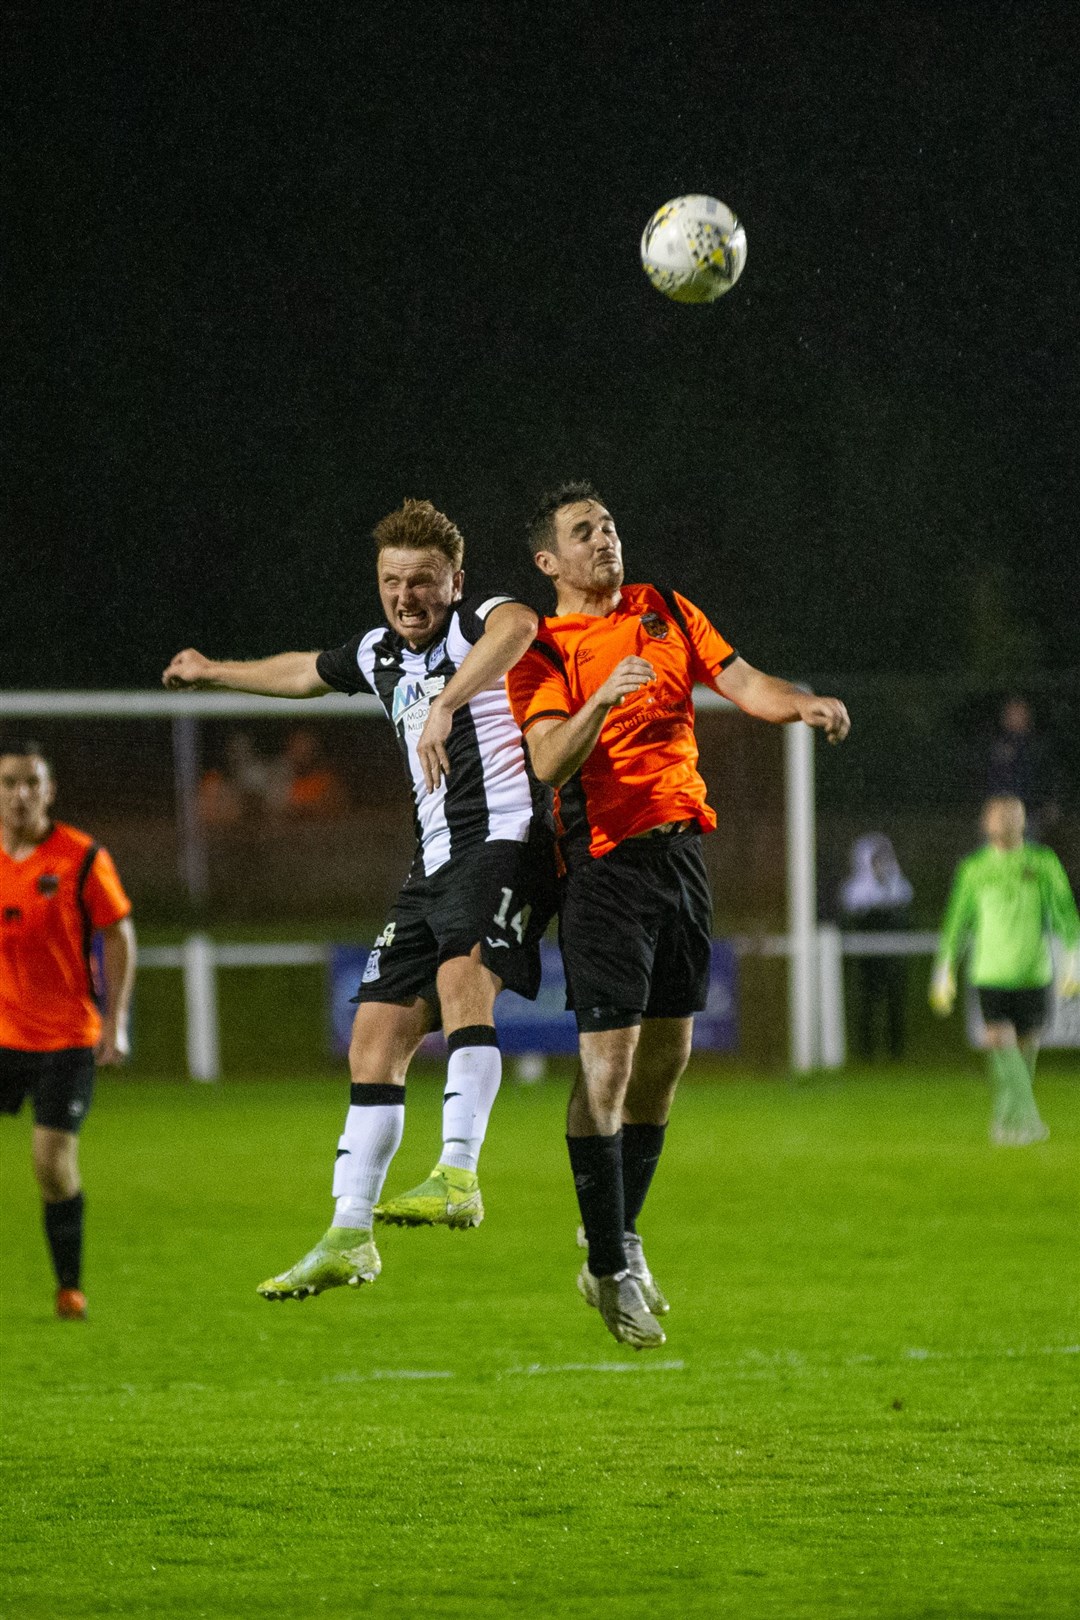 Elgin City's Tony Dingwall goes against Rothes full back Ali Stark to win a high ball. Picture: Daniel Forsyth....